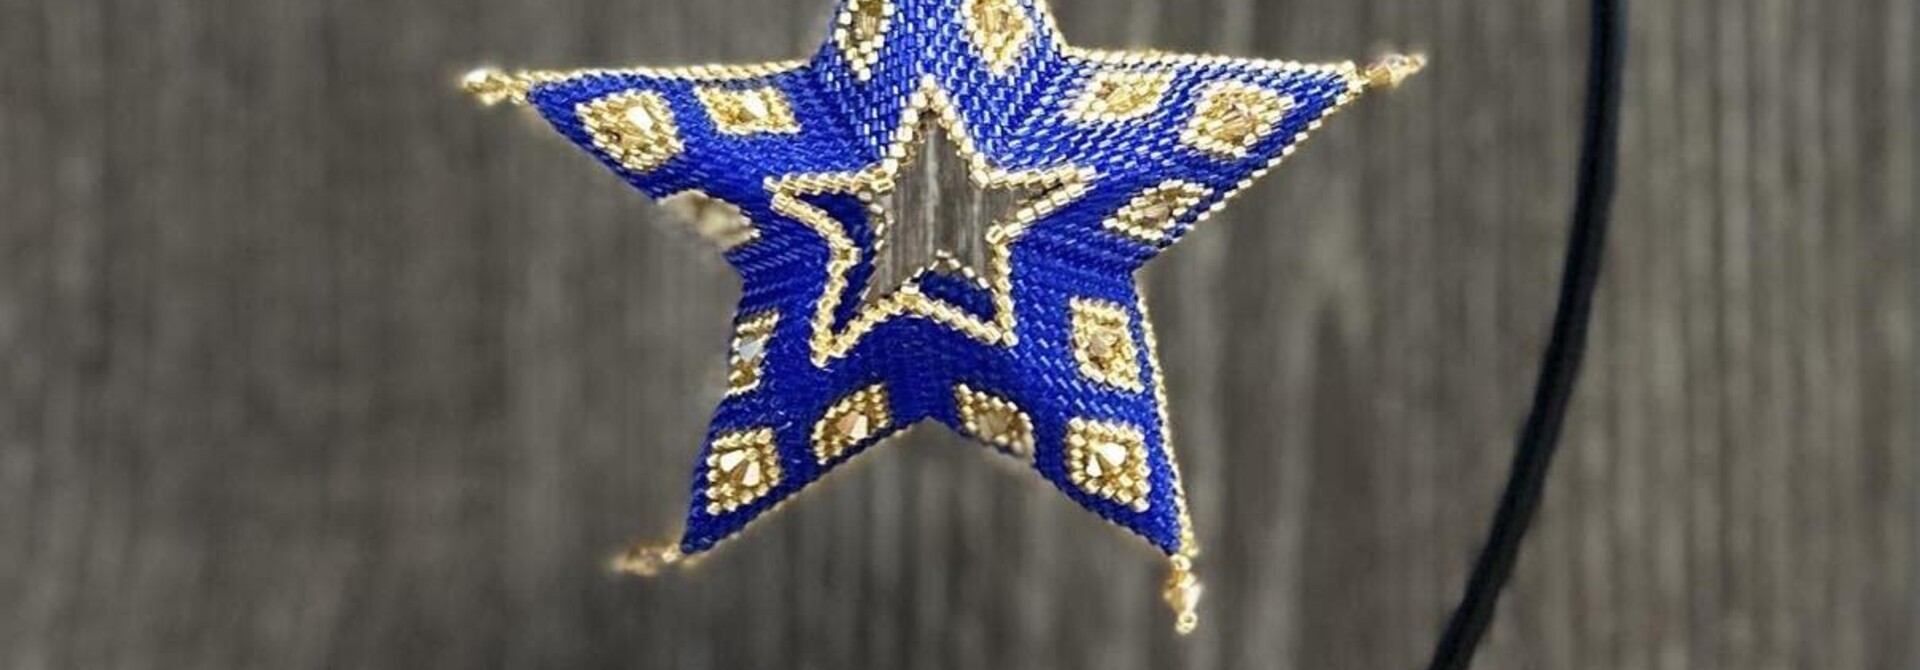 Hand Beaded 3D Star Ornament by Danelle Bibles